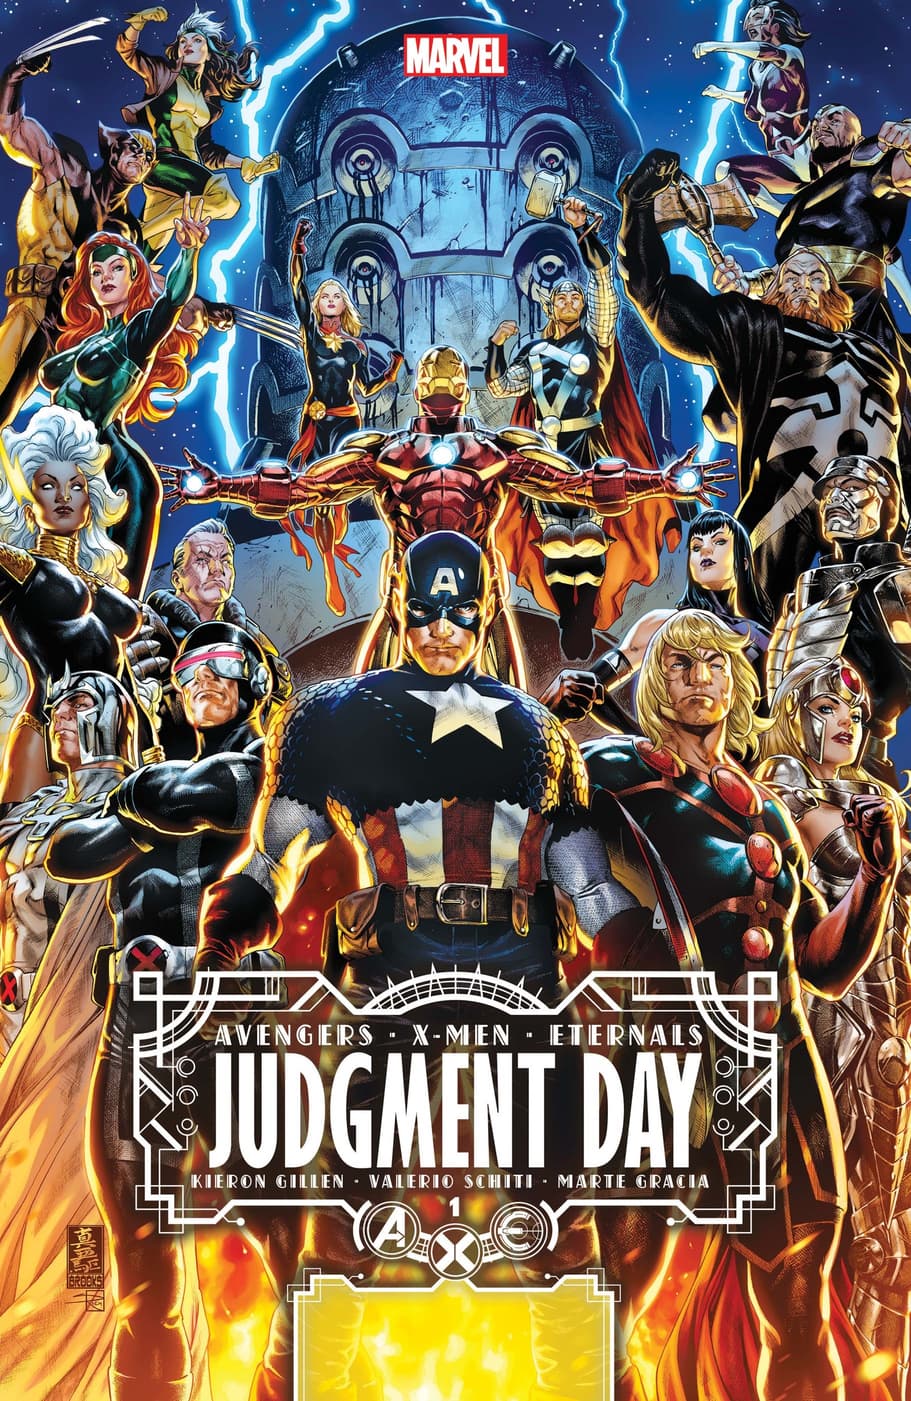 A.X.E.: JUDGMENT DAY #1 cover by Mark Brooks